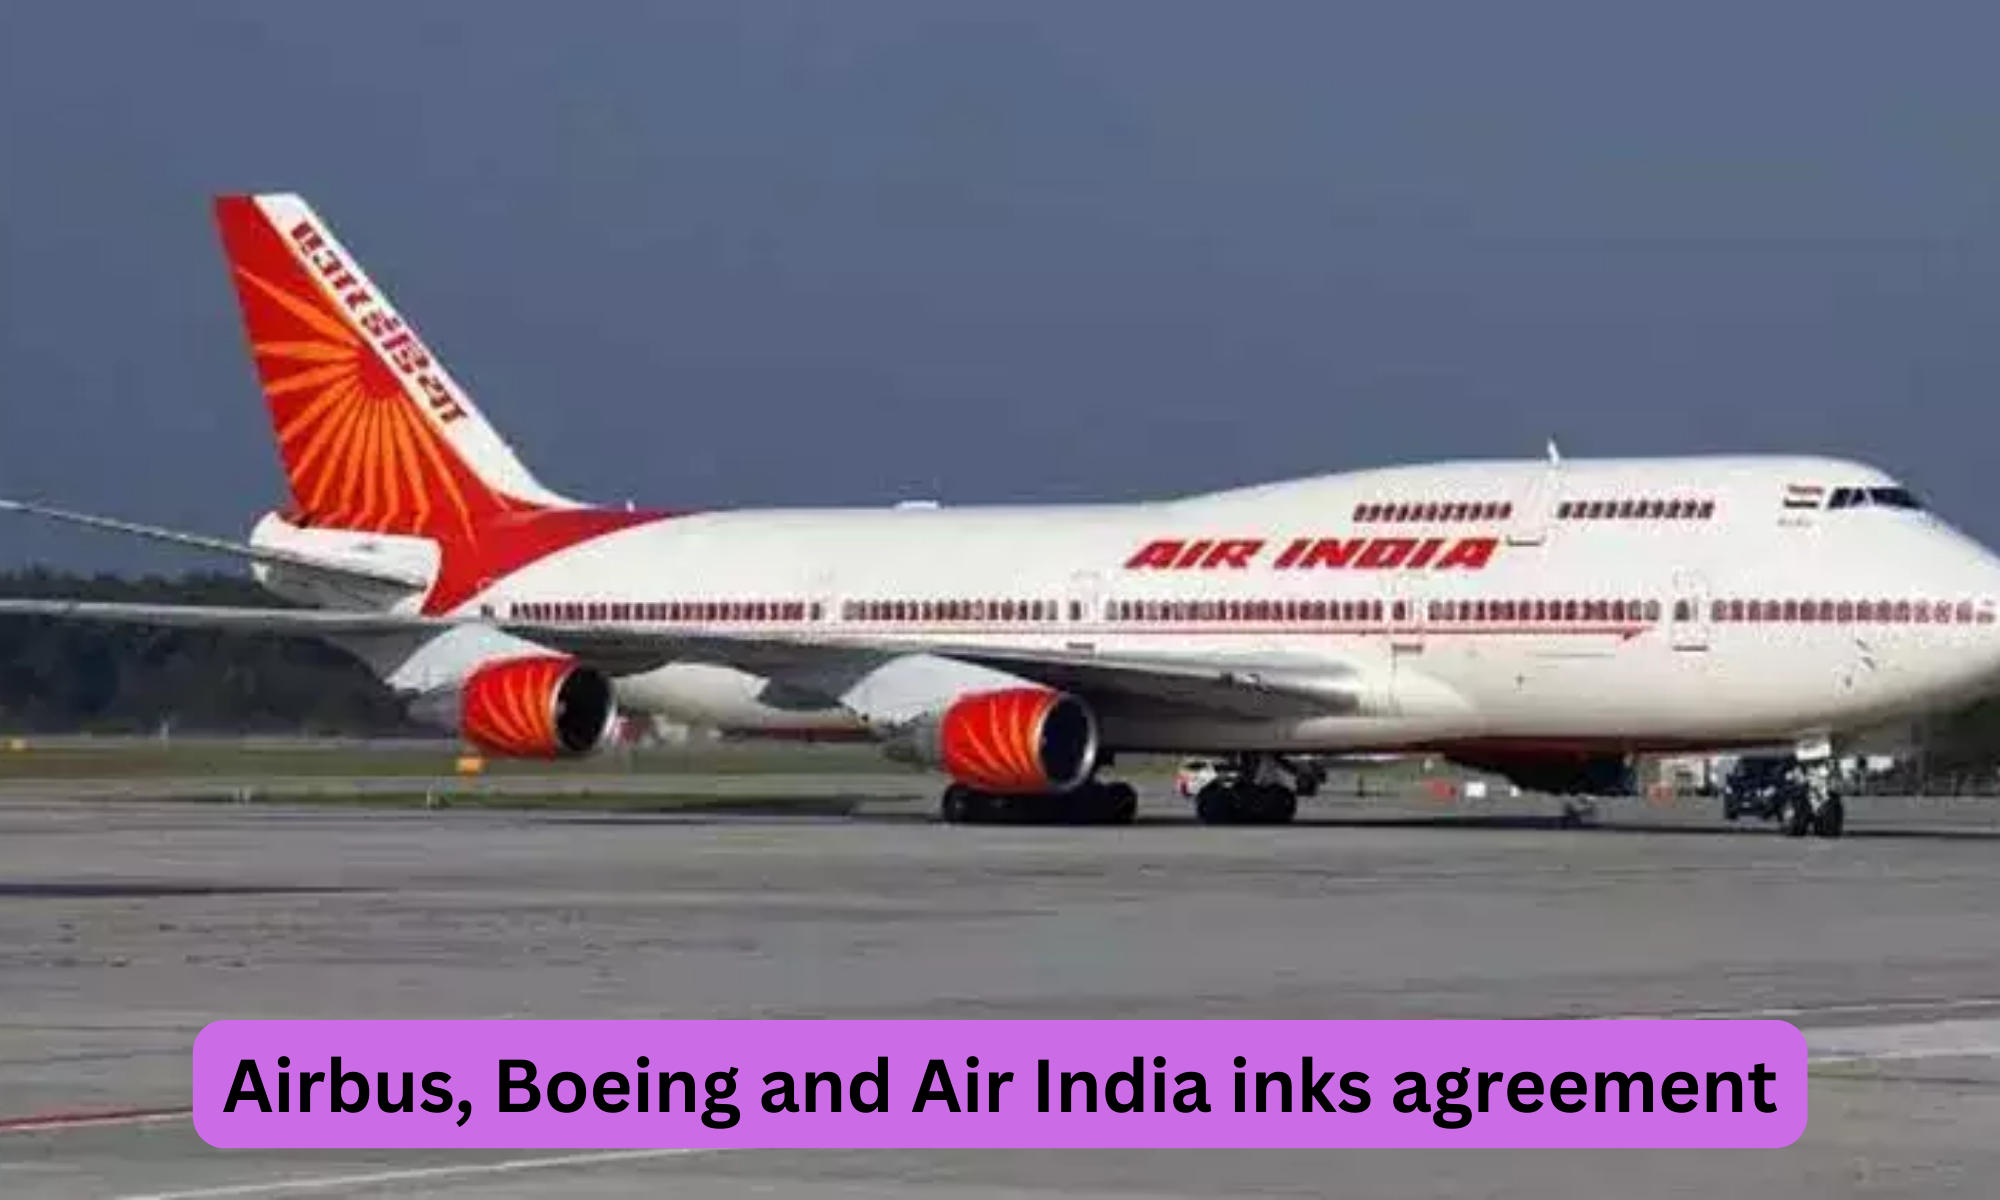 Airbus, Boeing and Air India inks agreement